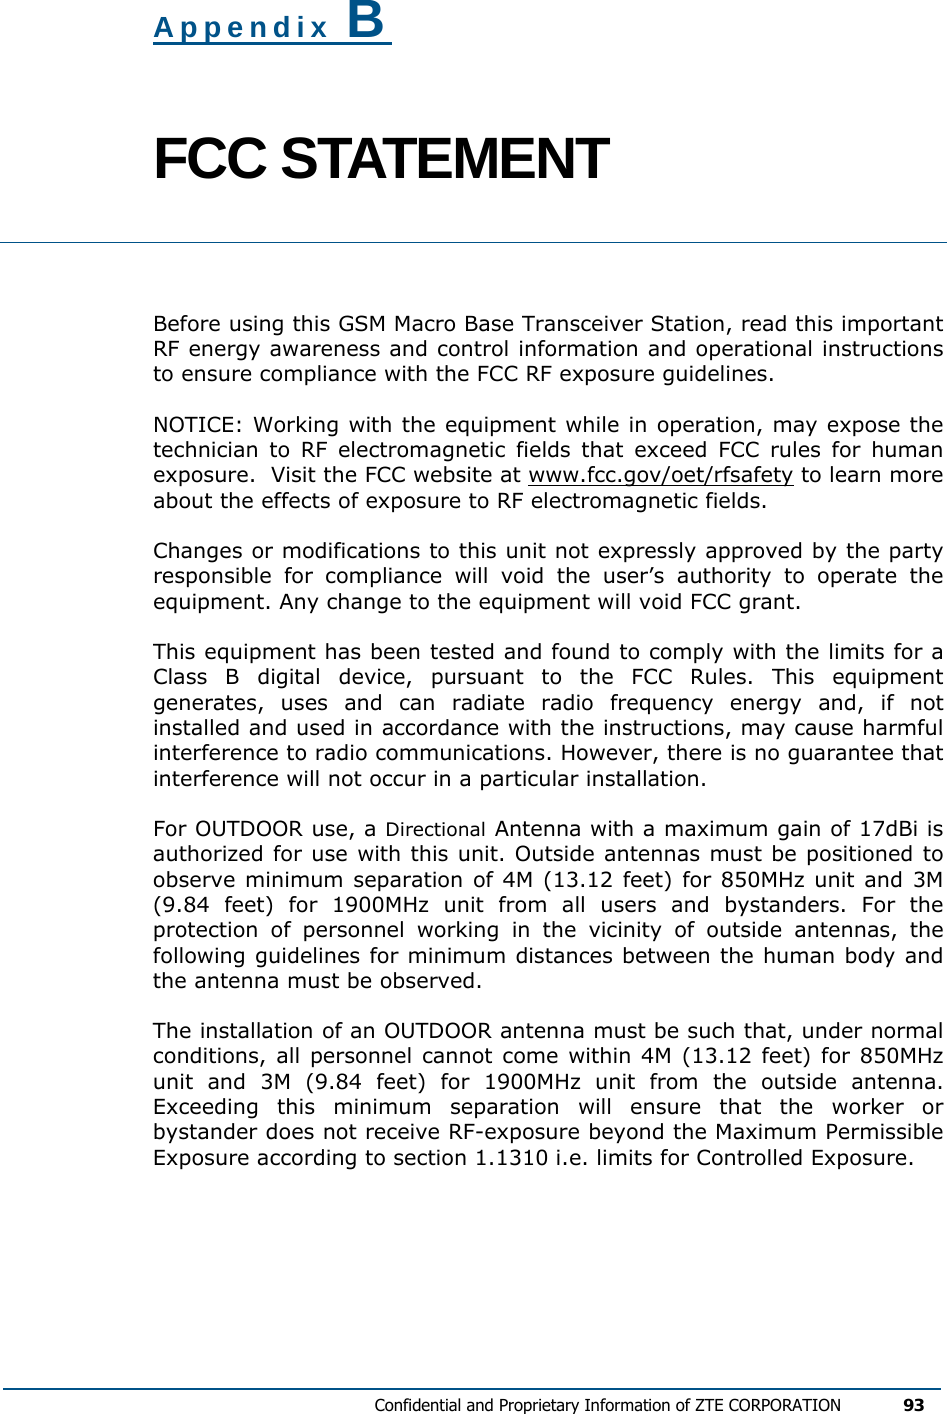   Confidential and Proprietary Information of ZTE CORPORATION 93  Appendix B FCC STATEMENT  Before using this GSM Macro Base Transceiver Station, read this important RF energy awareness and control information and operational instructions to ensure compliance with the FCC RF exposure guidelines. NOTICE: Working with the equipment while in operation, may expose the technician to RF electromagnetic fields that exceed FCC rules for human exposure.  Visit the FCC website at www.fcc.gov/oet/rfsafety to learn more about the effects of exposure to RF electromagnetic fields. Changes or modifications to this unit not expressly approved by the party responsible for compliance will void the user’s authority to operate the equipment. Any change to the equipment will void FCC grant. This equipment has been tested and found to comply with the limits for a Class B digital device, pursuant to the FCC Rules. This equipment generates, uses and can radiate radio frequency energy and, if not installed and used in accordance with the instructions, may cause harmful interference to radio communications. However, there is no guarantee that interference will not occur in a particular installation.  For OUTDOOR use, a Directional Antenna with a maximum gain of 17dBi is authorized for use with this unit. Outside antennas must be positioned to observe minimum separation of 4M (13.12 feet) for 850MHz unit and 3M (9.84 feet) for 1900MHz unit from all users and bystanders. For the protection of personnel working in the vicinity of outside antennas, the following guidelines for minimum distances between the human body and the antenna must be observed. The installation of an OUTDOOR antenna must be such that, under normal conditions, all personnel cannot come within 4M (13.12 feet) for 850MHz unit and 3M (9.84 feet) for 1900MHz unit from the outside antenna. Exceeding this minimum separation will ensure that the worker or bystander does not receive RF-exposure beyond the Maximum Permissible Exposure according to section 1.1310 i.e. limits for Controlled Exposure. 